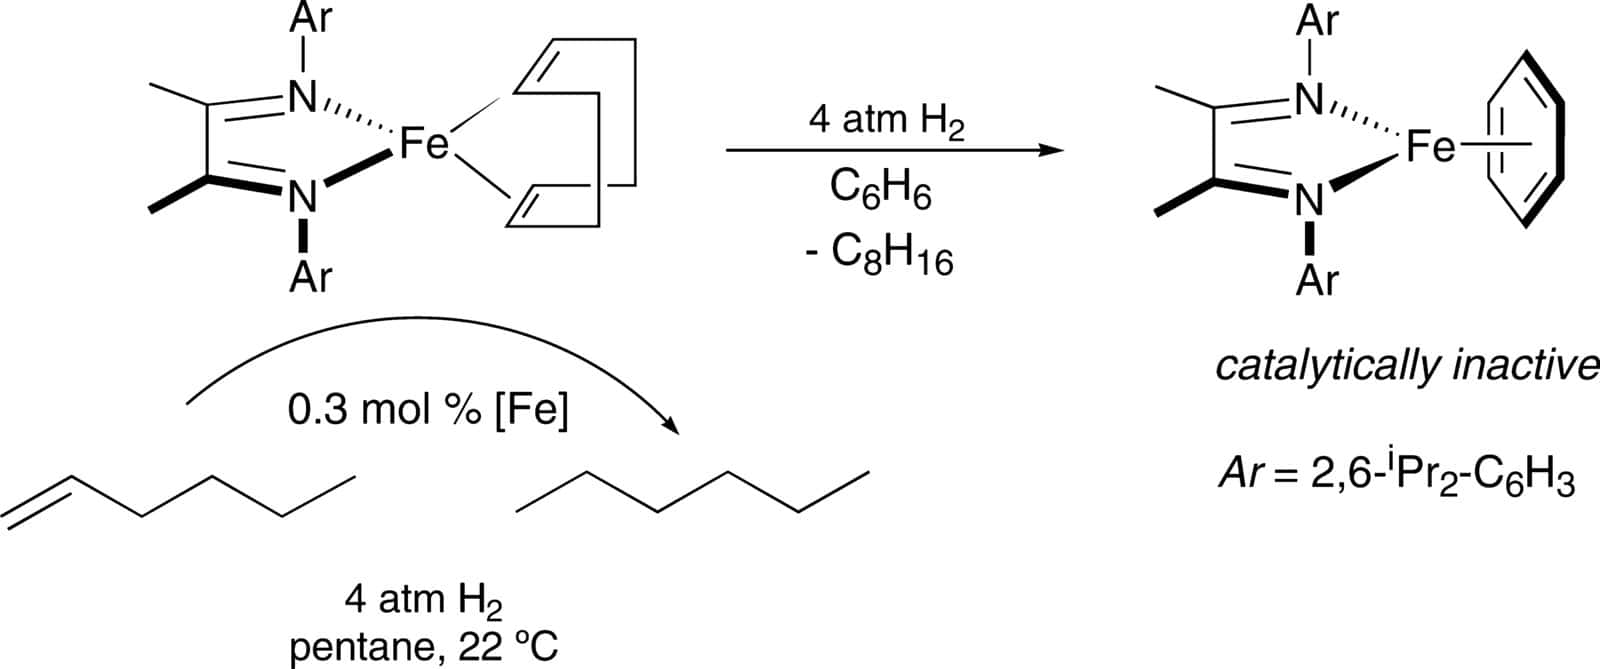 Low-valent α-diimine complexes for catalytic olefin hydrogenation.